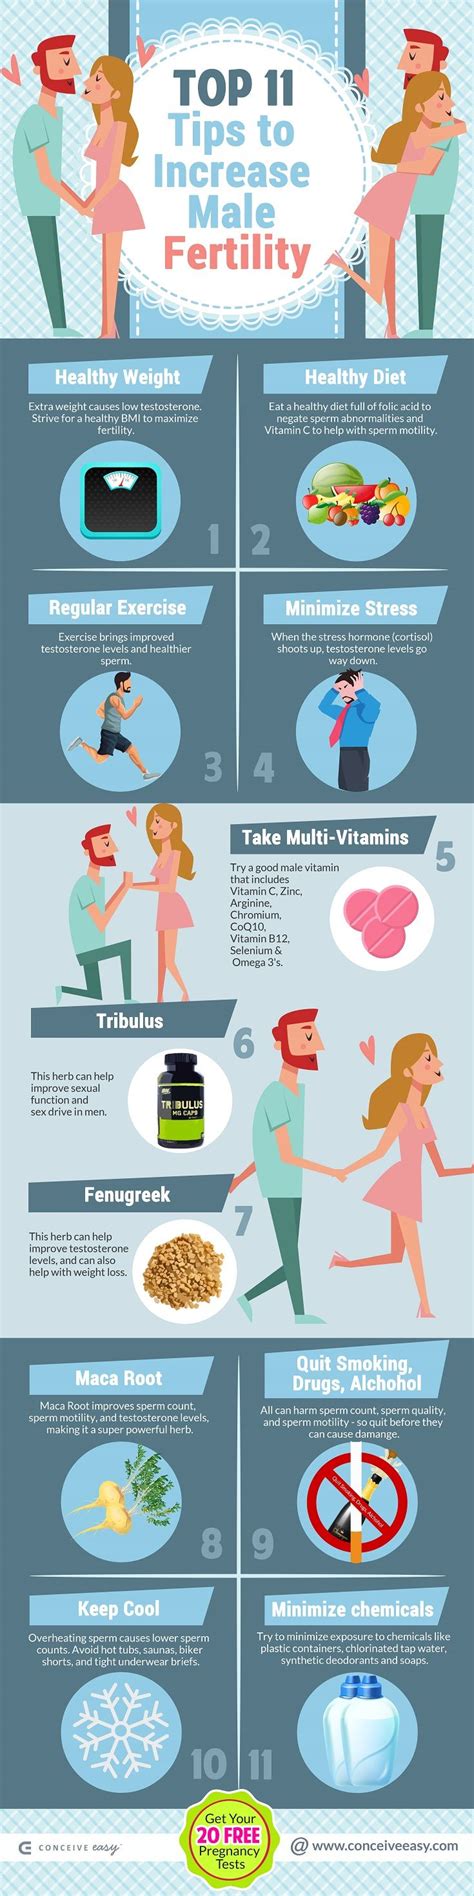 Top 11 Tips To Increase Male Fertility Infographic Natural Fertility